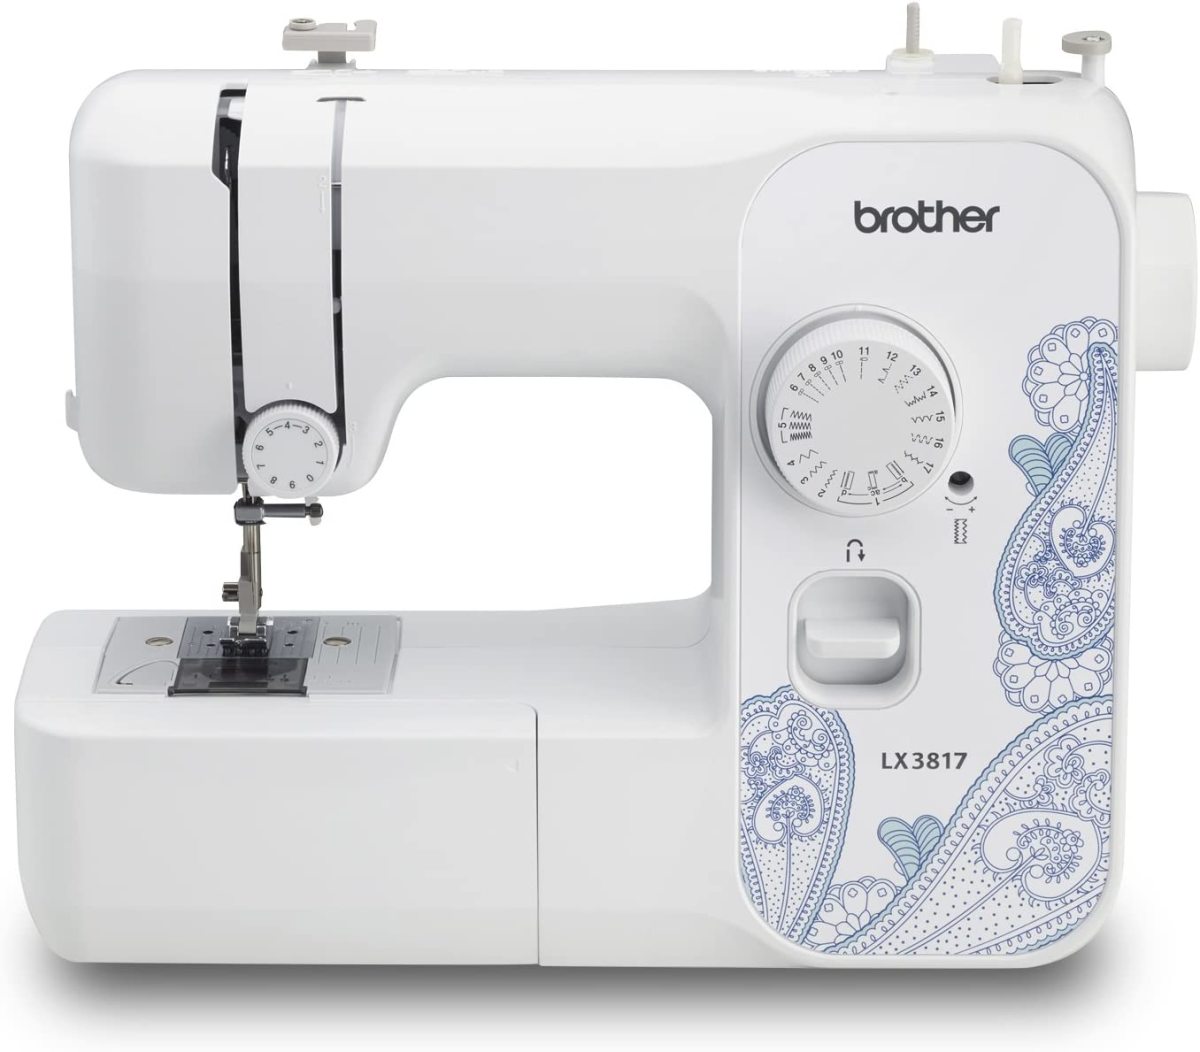 Brother Lx3817 Sewing Machine: A Good Choice for 2022